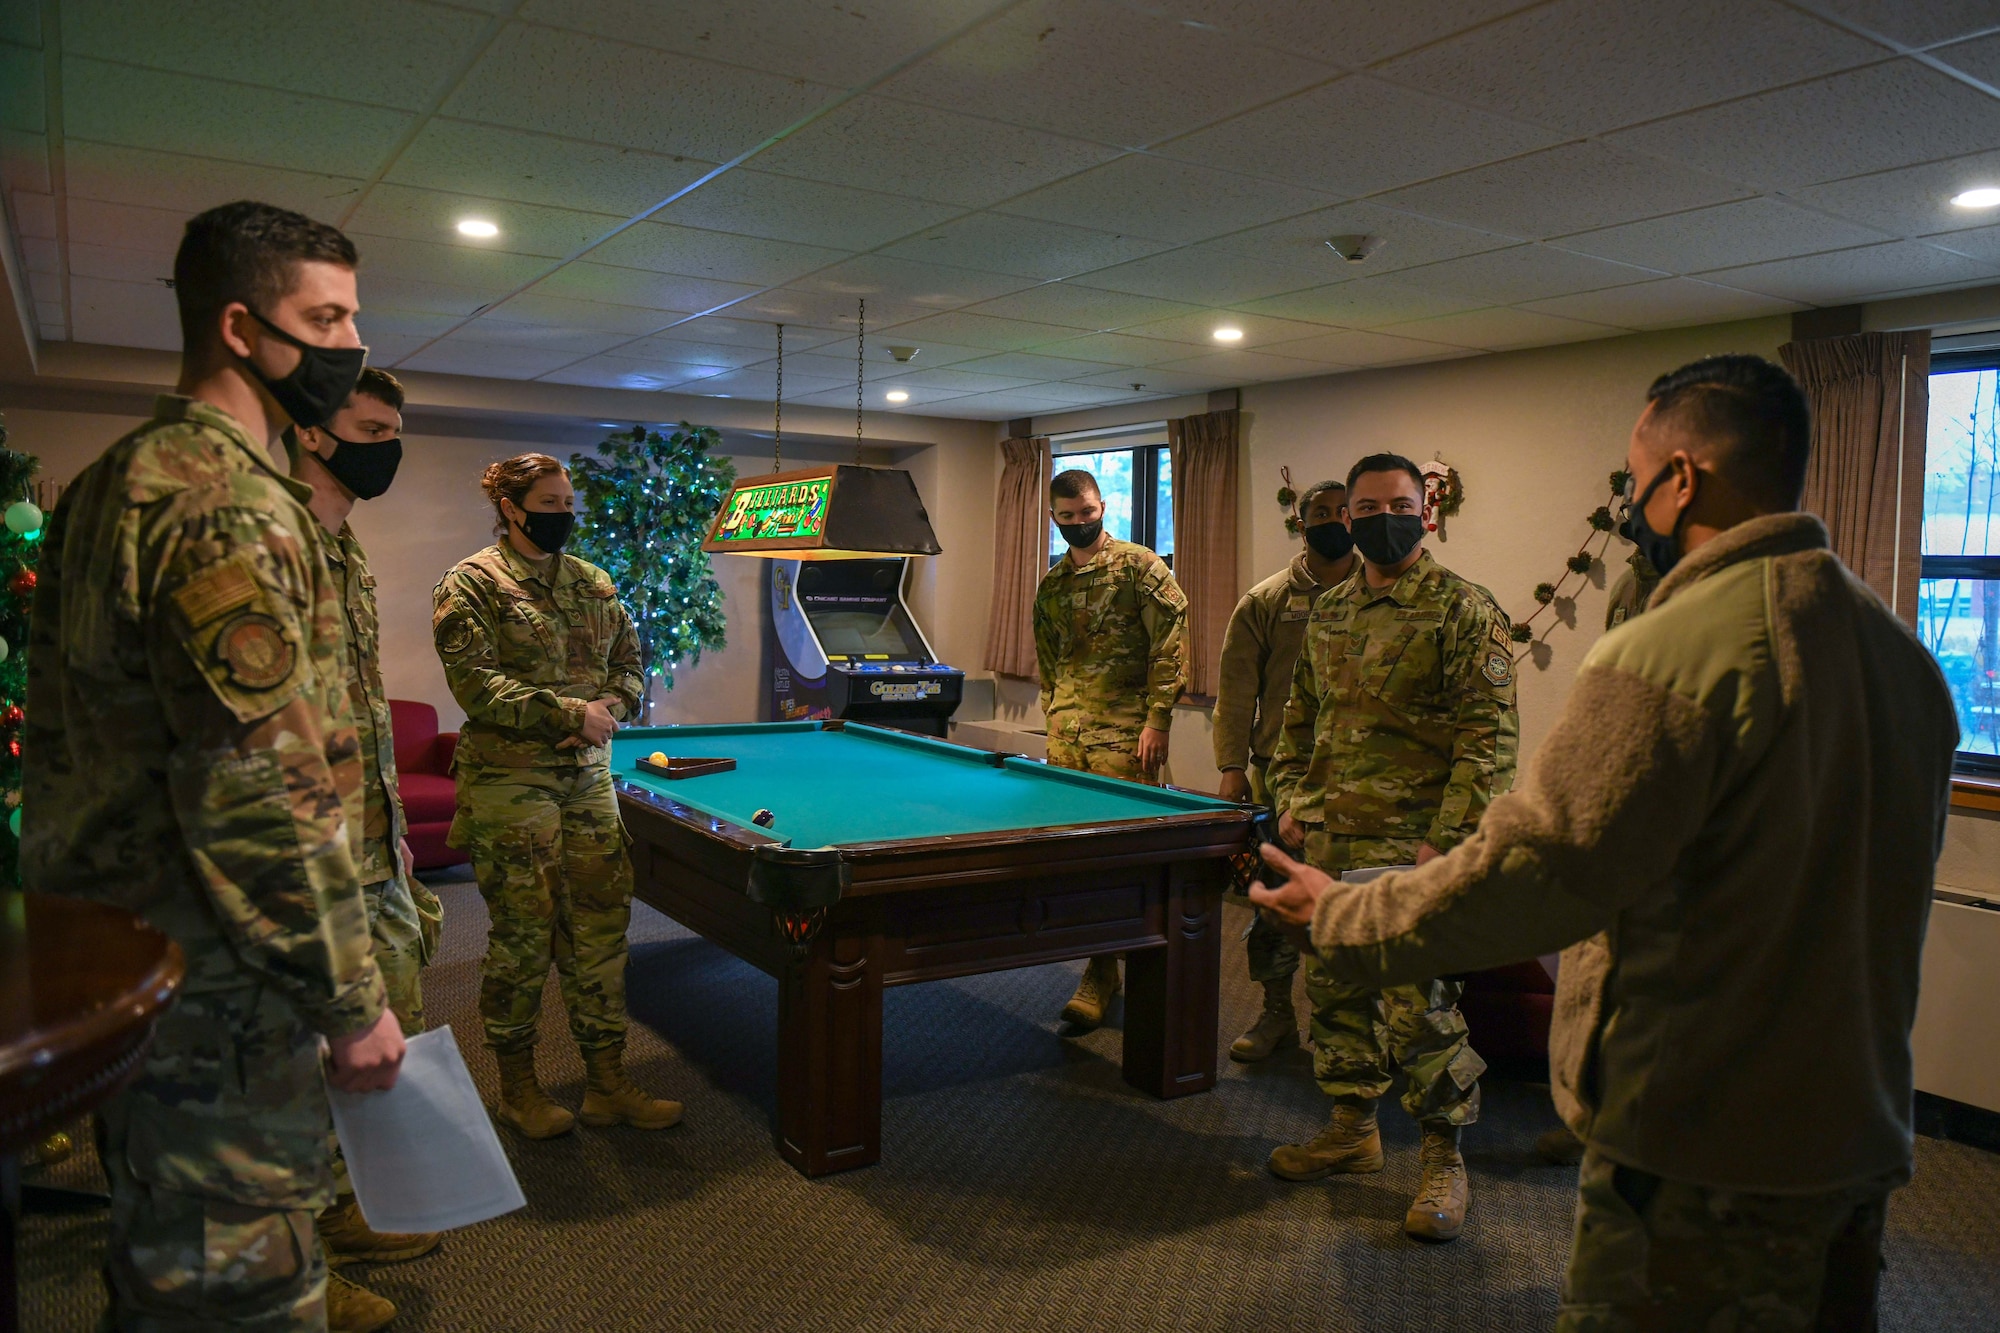 Airmen stand around a pool table discussing an ALS course.